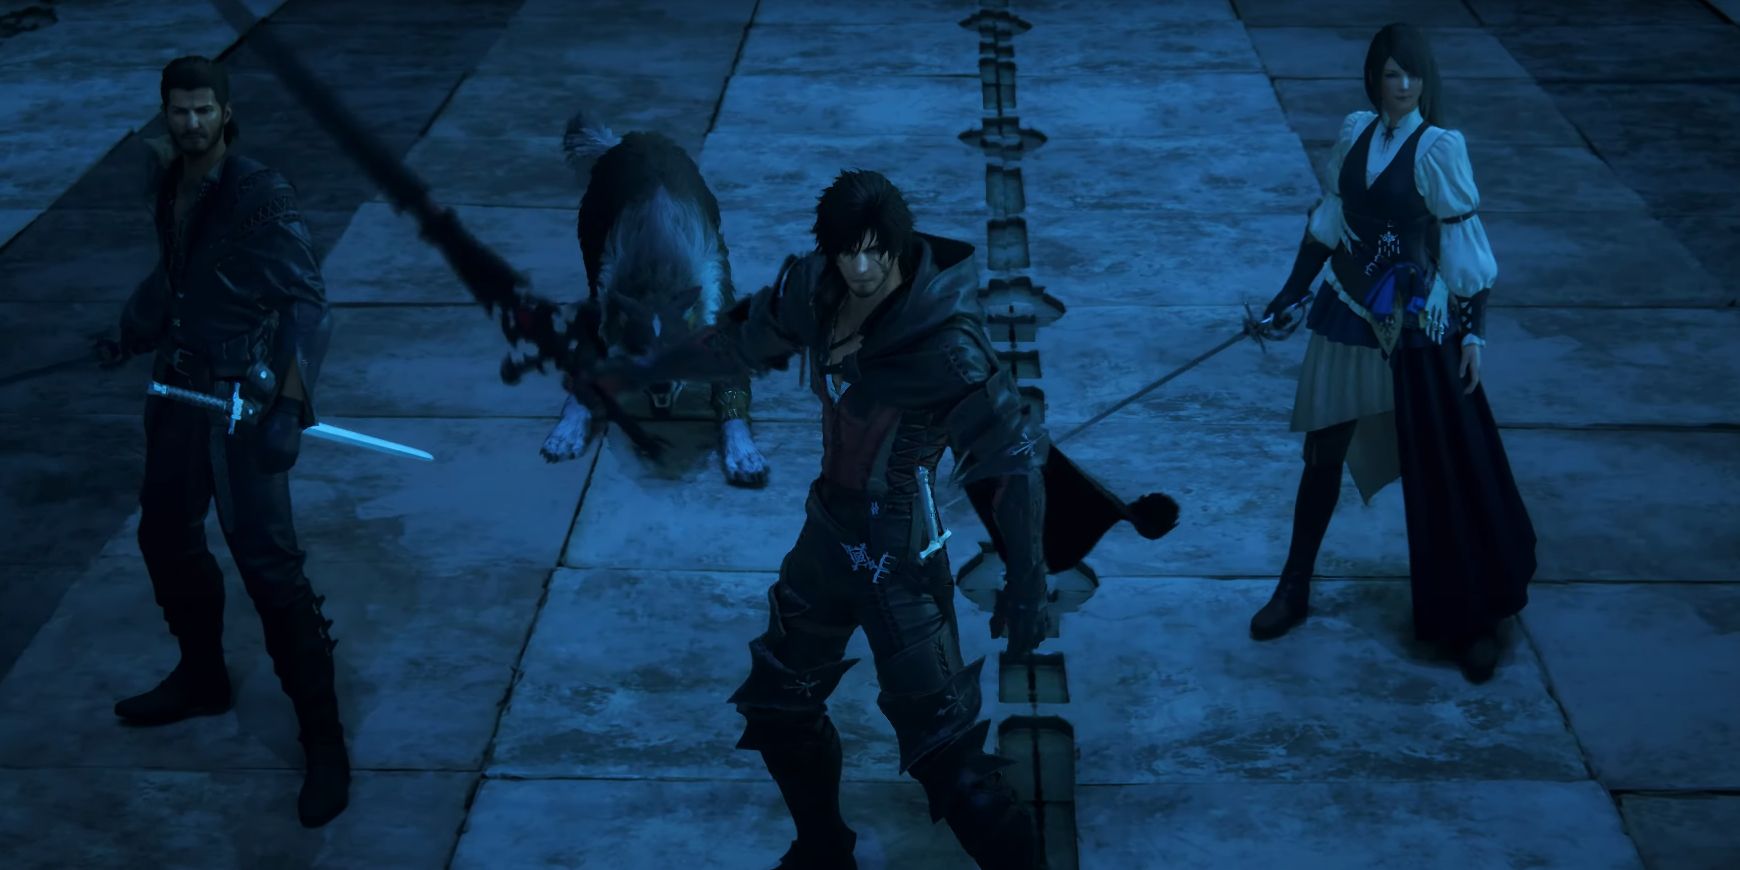 A shot from Final Fantasy 16's trailer, revealed at the Game Awards 2022.